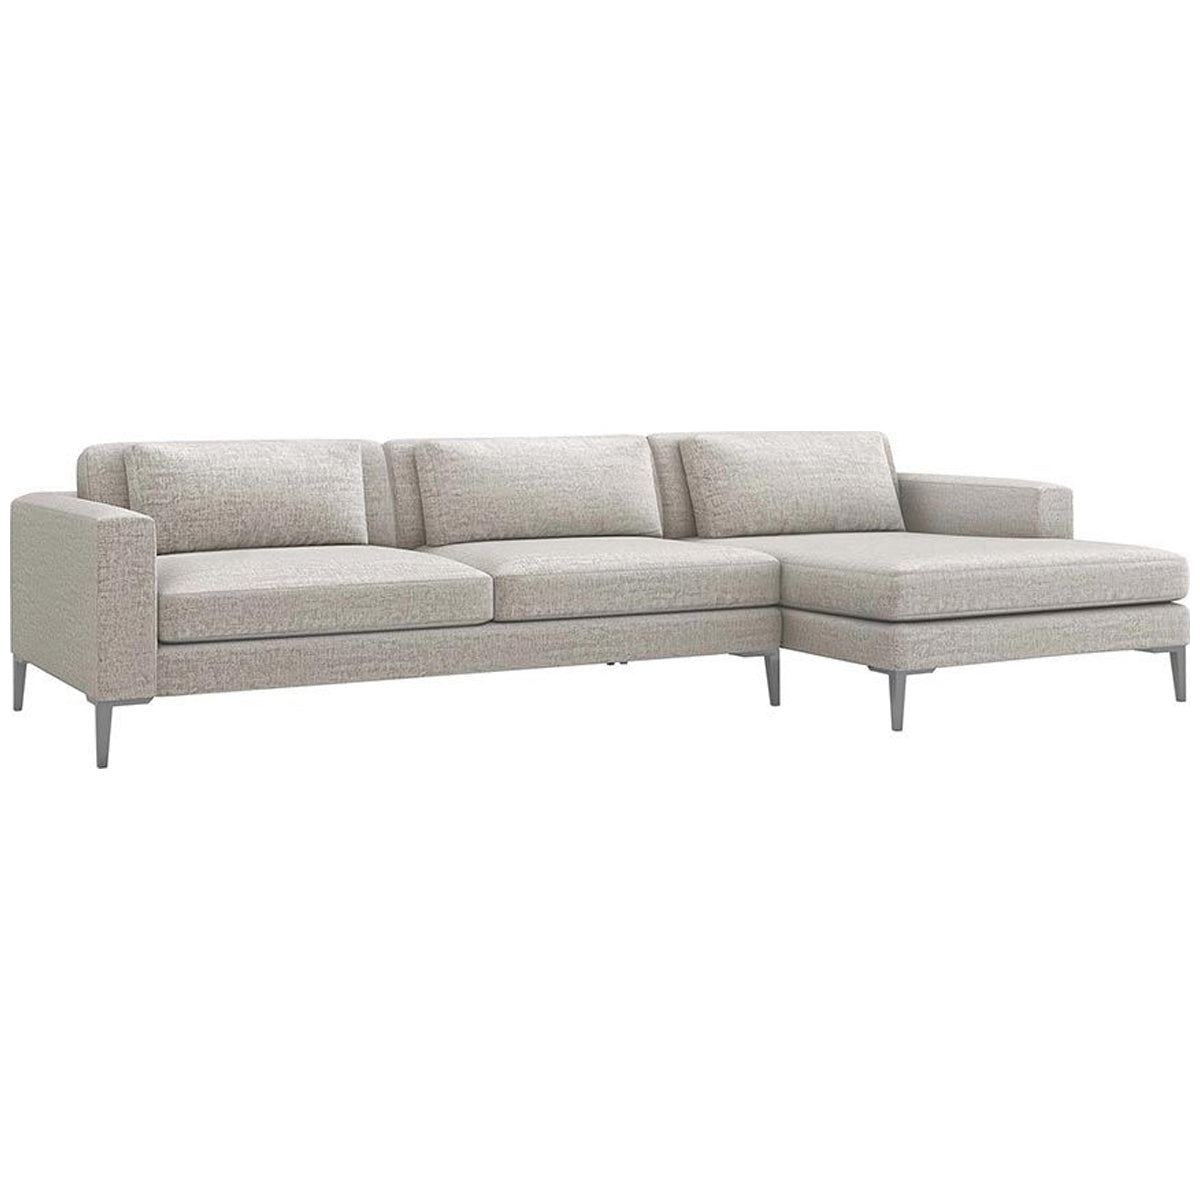 Interlude Home Izzy Chaise 2-Piece Sectional - Storm